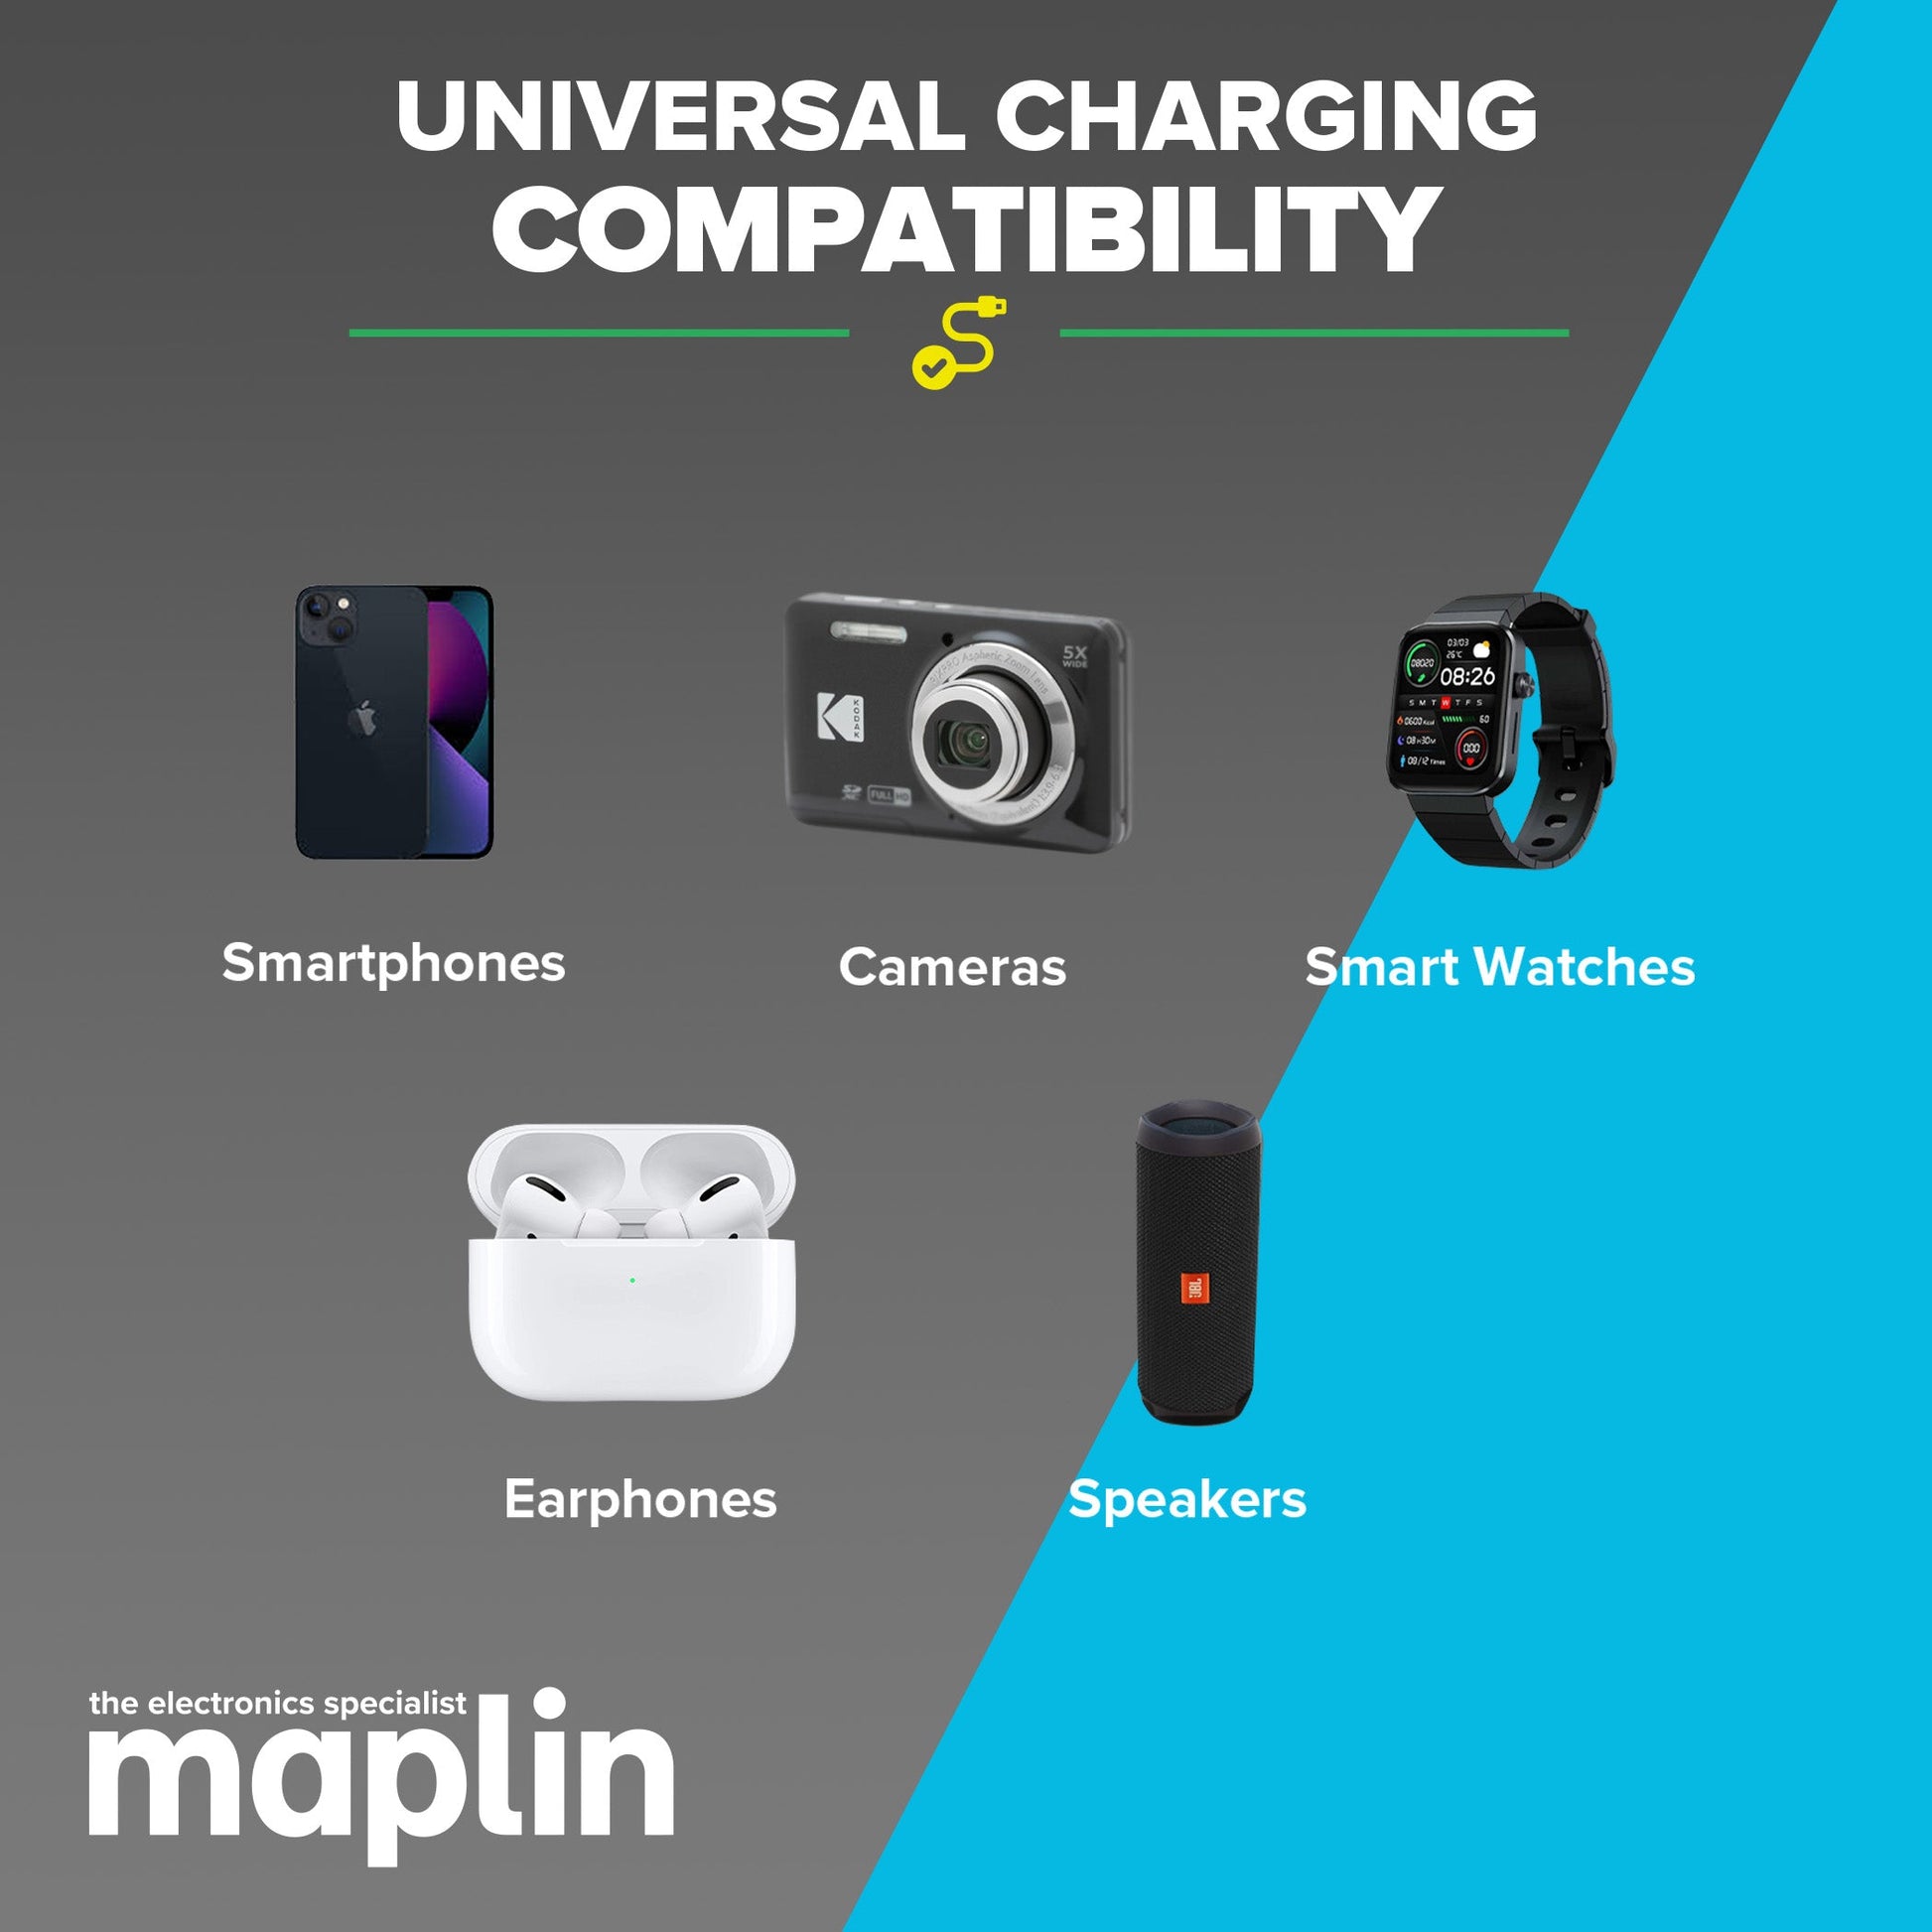 Maplin 6 Port USB Charging Station 4x USB-A / 2x USB-C 65W High Speed Charging with 1m Cable - maplin.co.uk